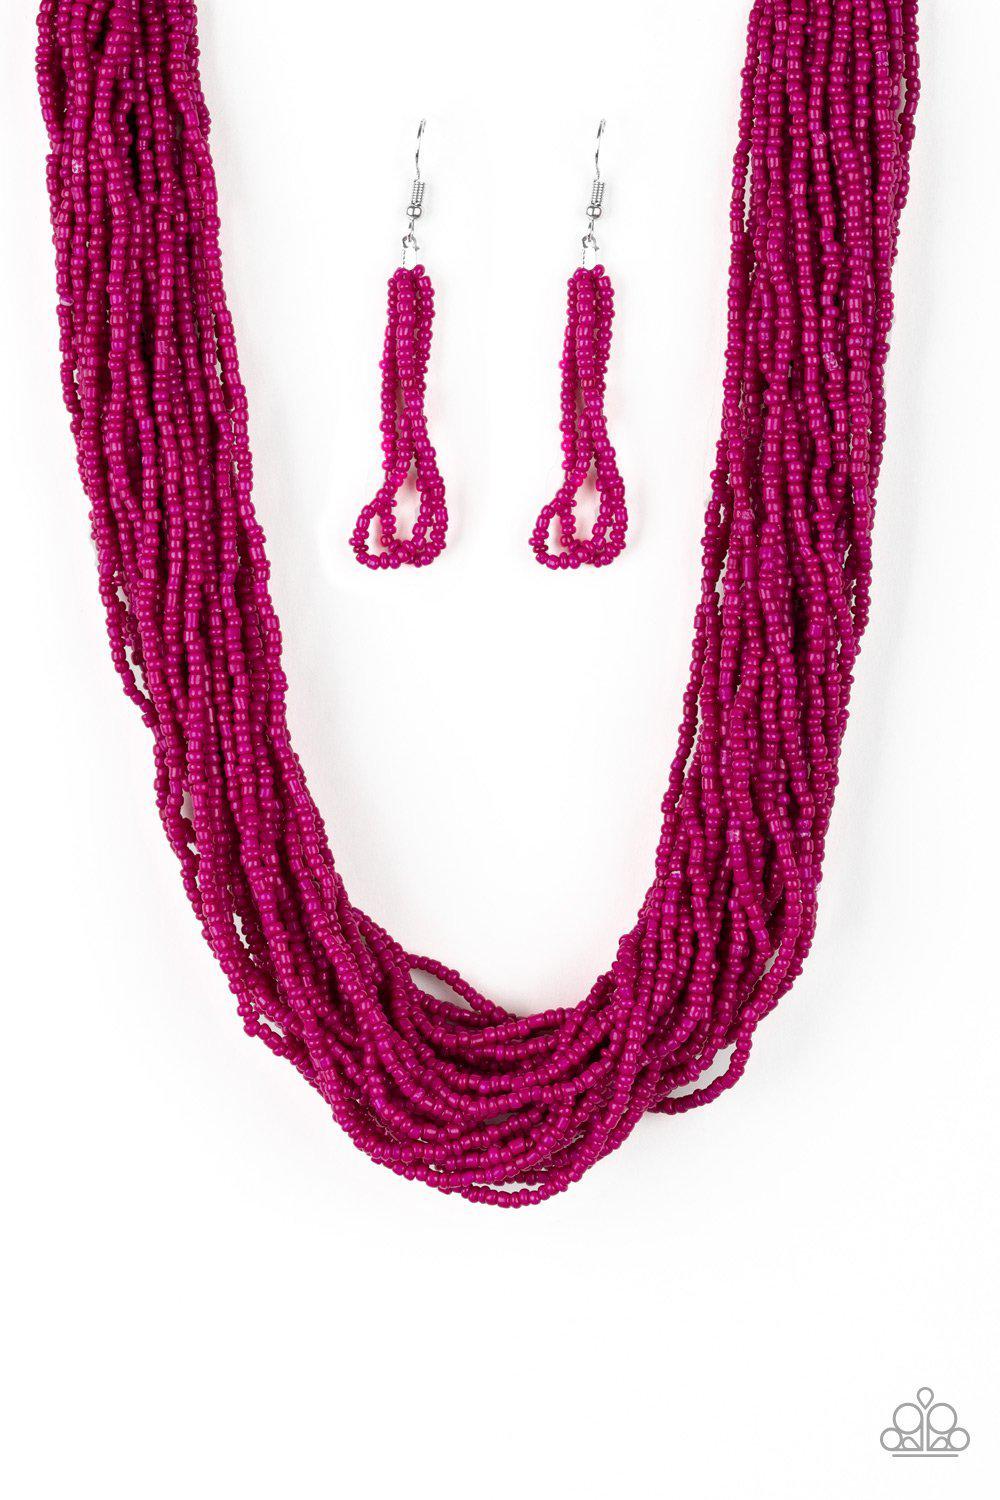 The Show Must CONGO On Pink Seed Bead Necklace and matching Earrings - Paparazzi Accessories-CarasShop.com - $5 Jewelry by Cara Jewels